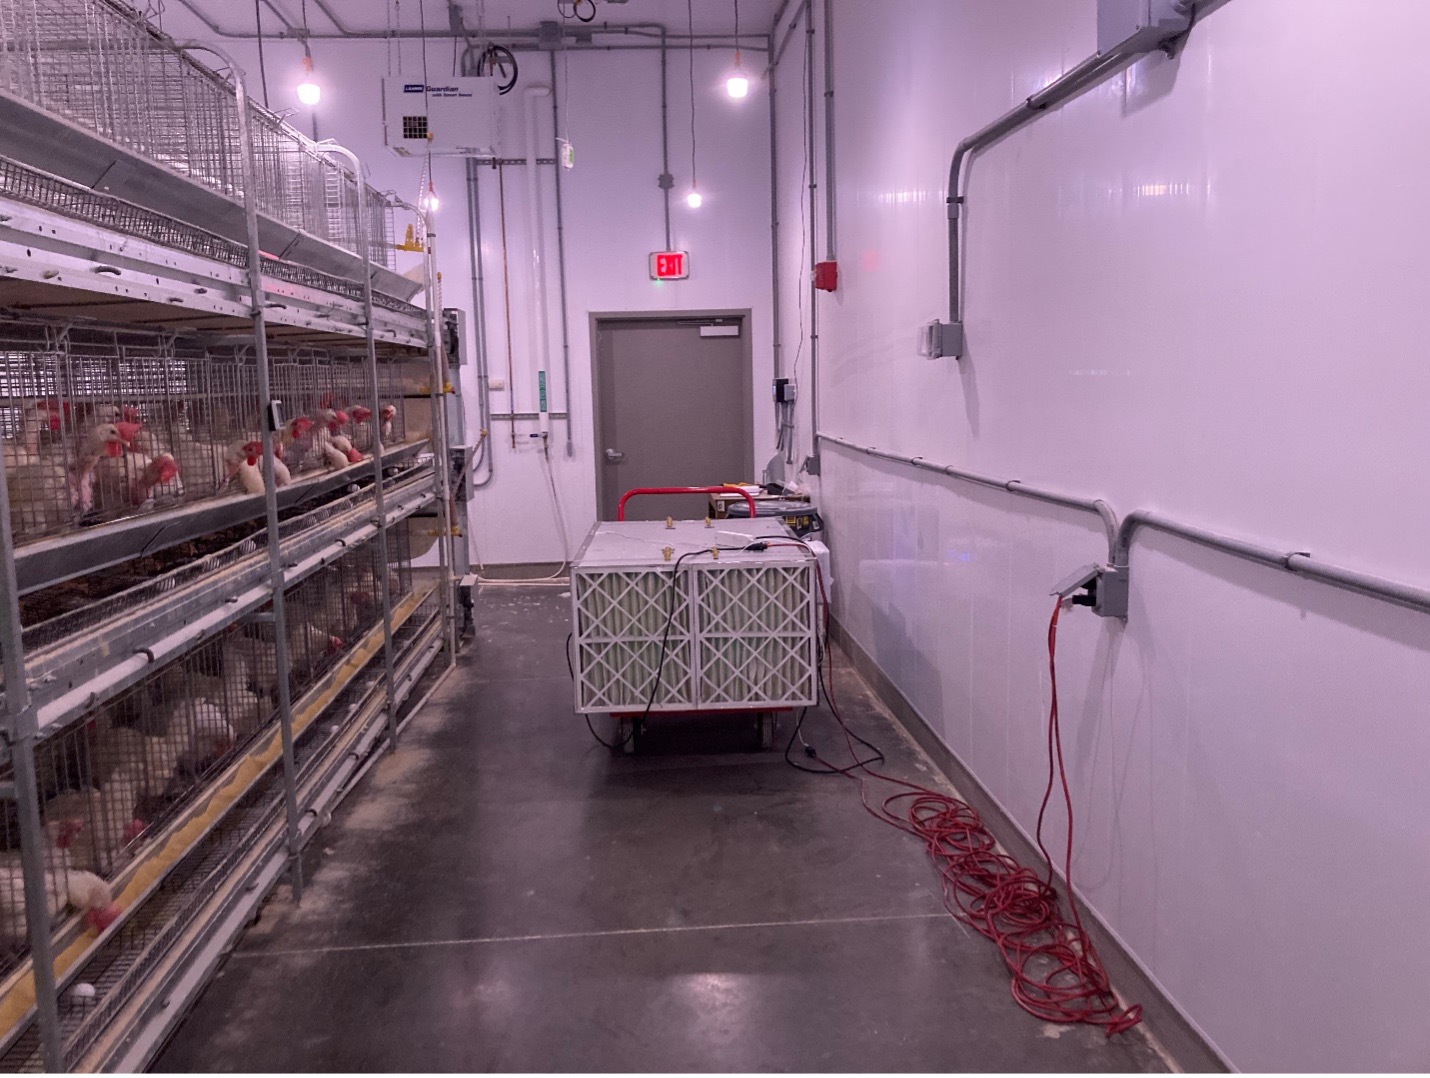 Photo of a room filled with chickens in cages and the prototype in the middle of the room.